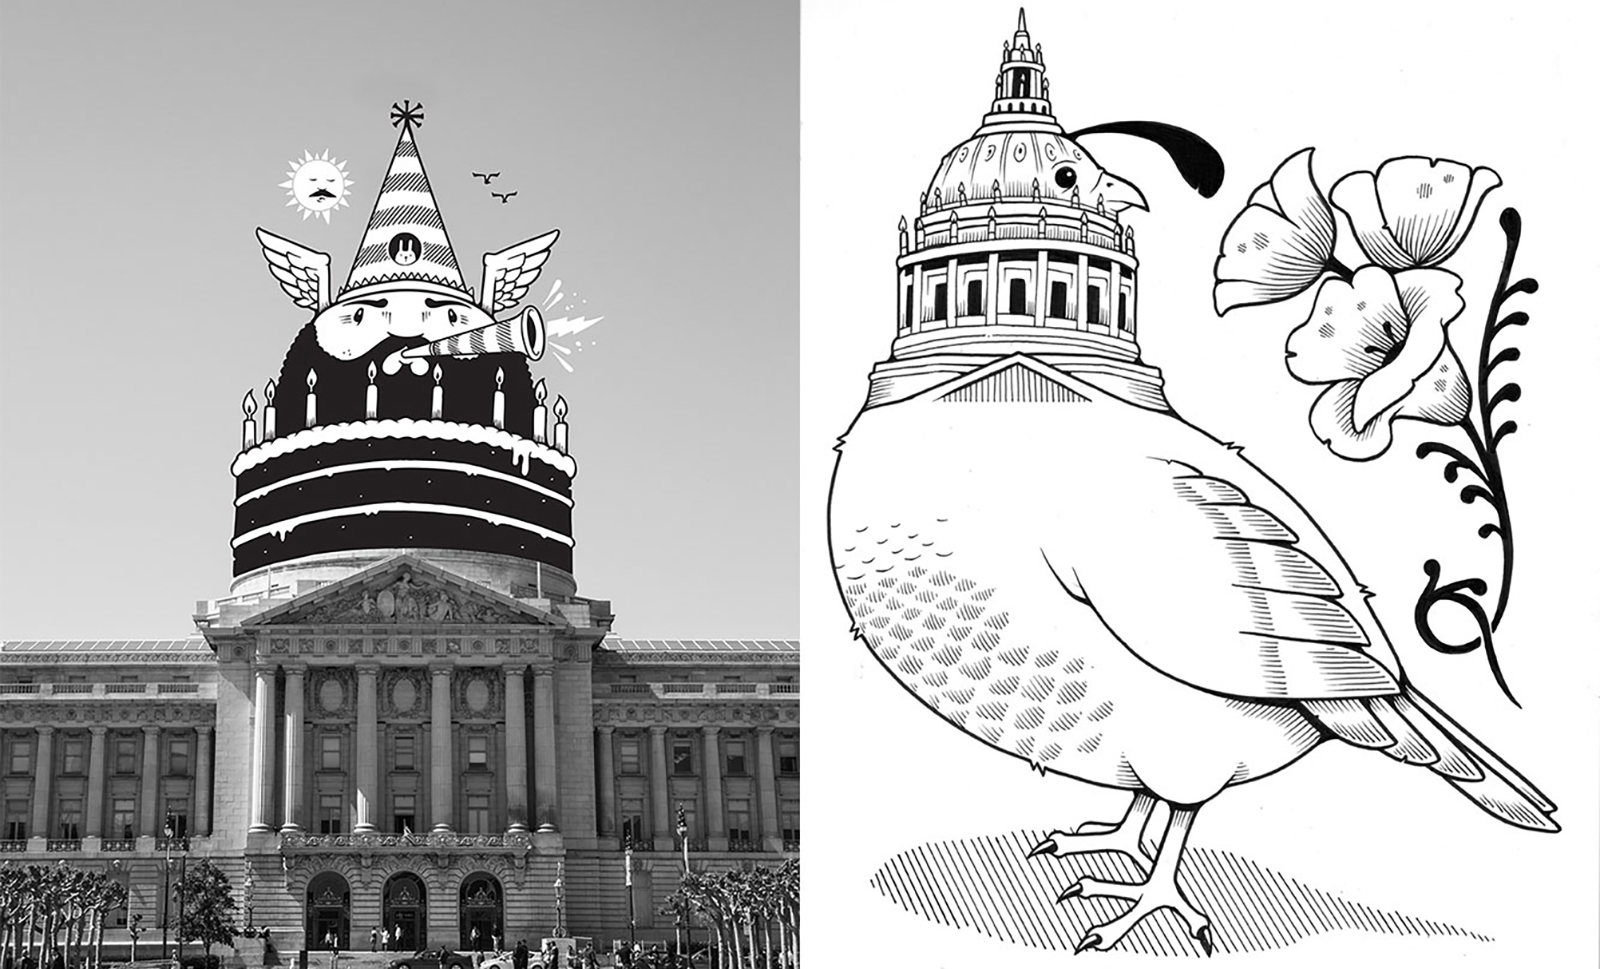 Jeremy Fish, Celebrate City Hall, 2015. Photograph by Rick Marr (left). State Bird and Flowers, 2015